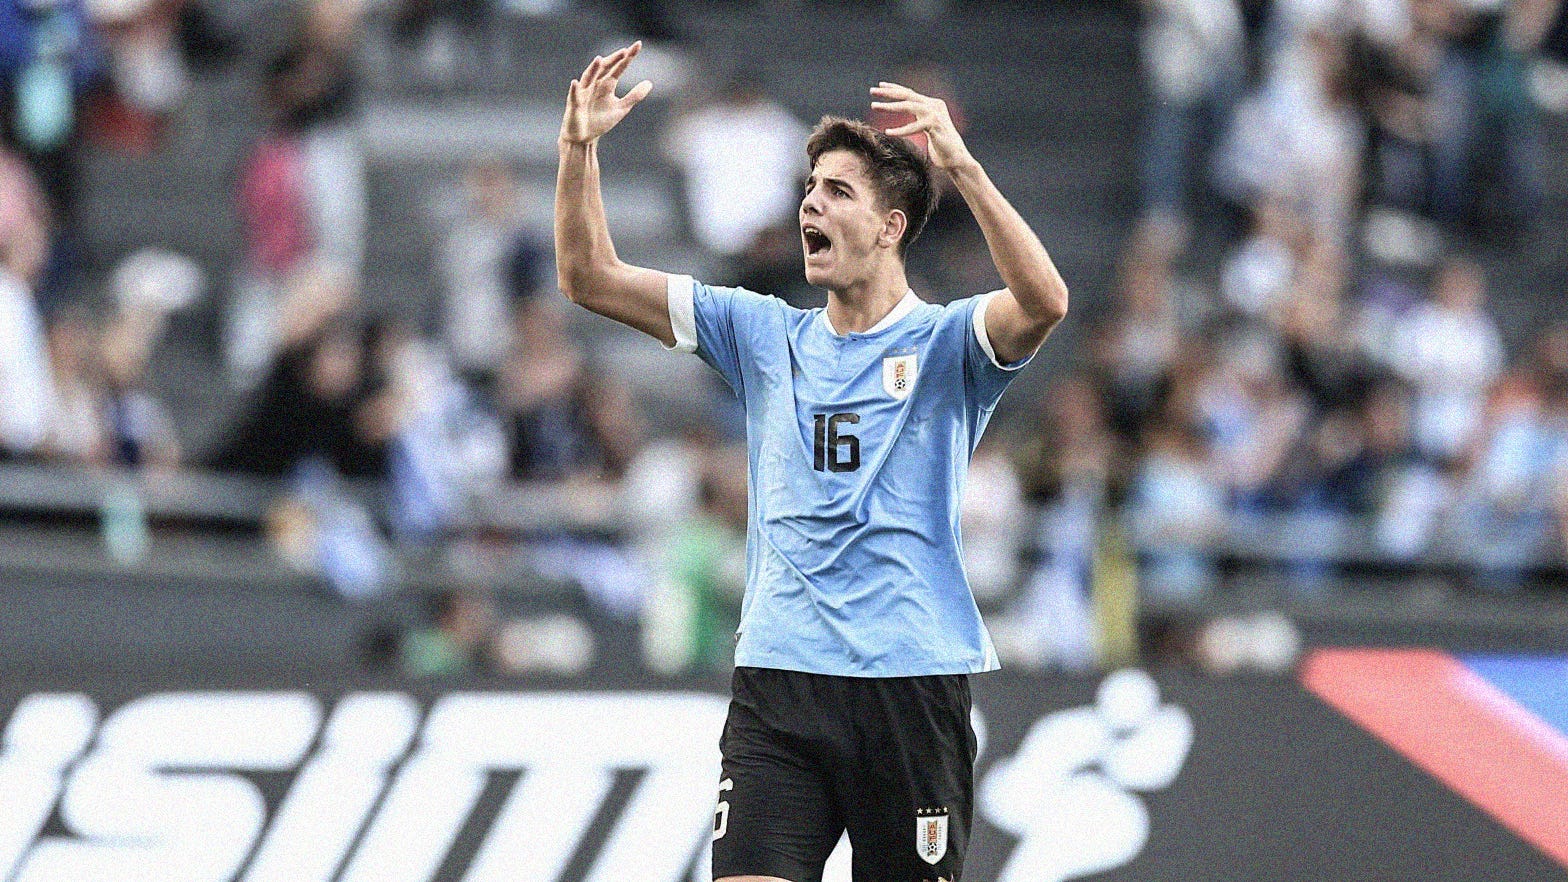 A photo of Uruguay's Facundo González waving his arms to hype up the fans at the 2023 FIFA U-20 World Cup